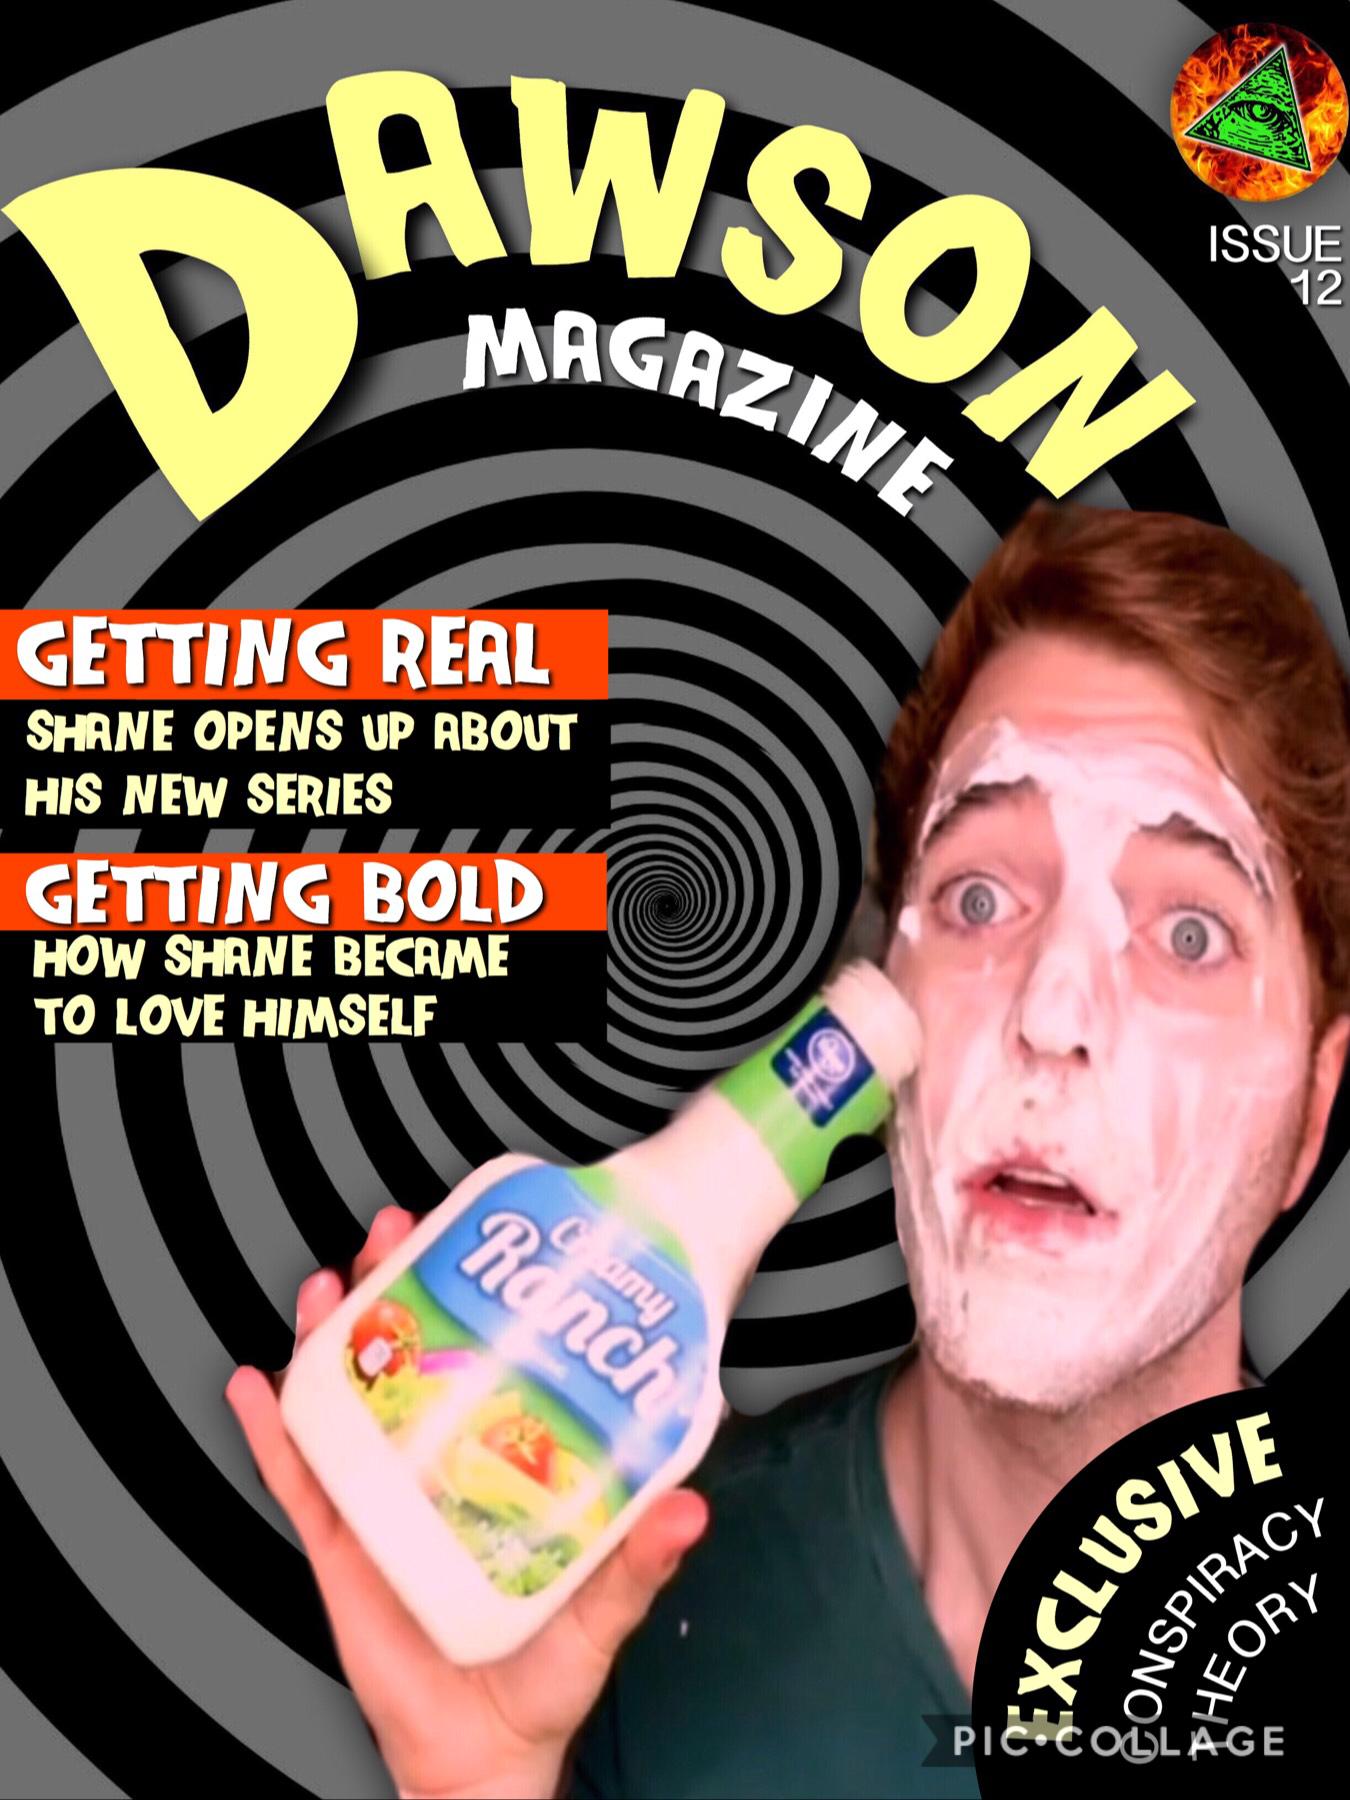 This was actually my first time doing a magazine cover. Funny enough, I'm actually putting together a 6 paged newsletter for a school assignment atm. Perhaps I could put it up on @PentagonPumps2000 when it's done.... It's been a while since I've posting a